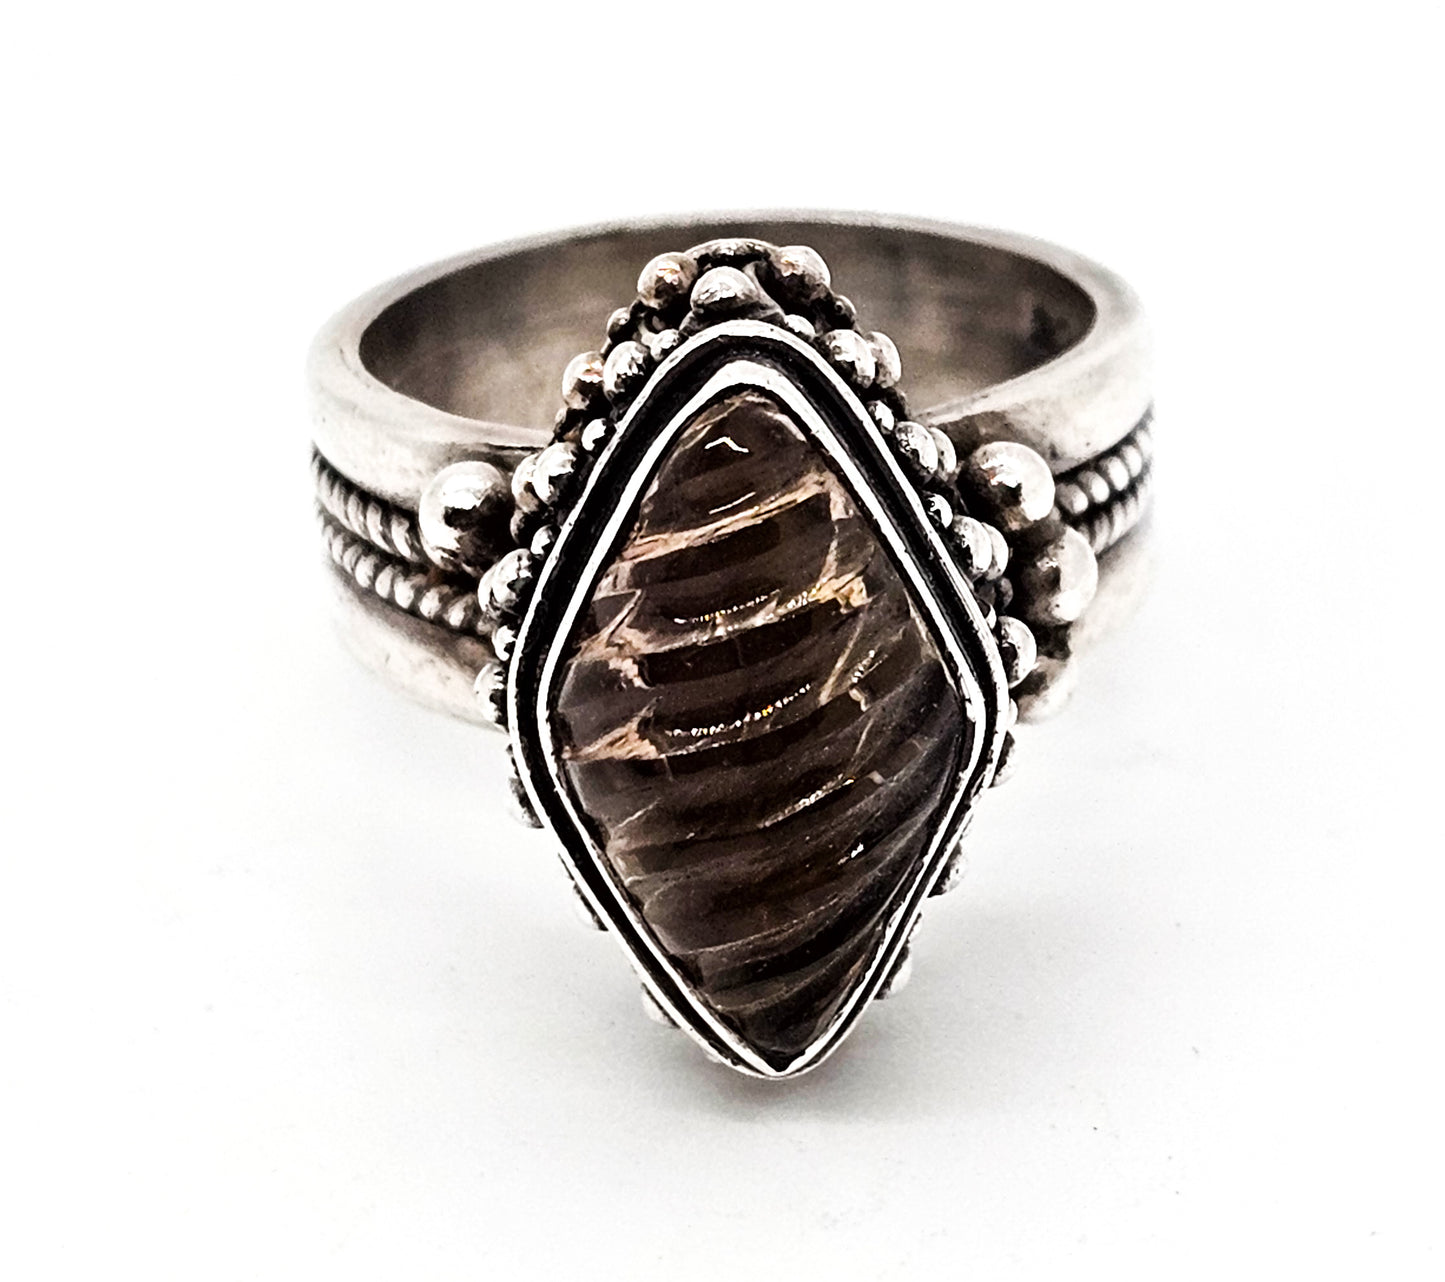 Ribbed Smokey Quartz elaborate woven wheat sterling silver ring size 7.5